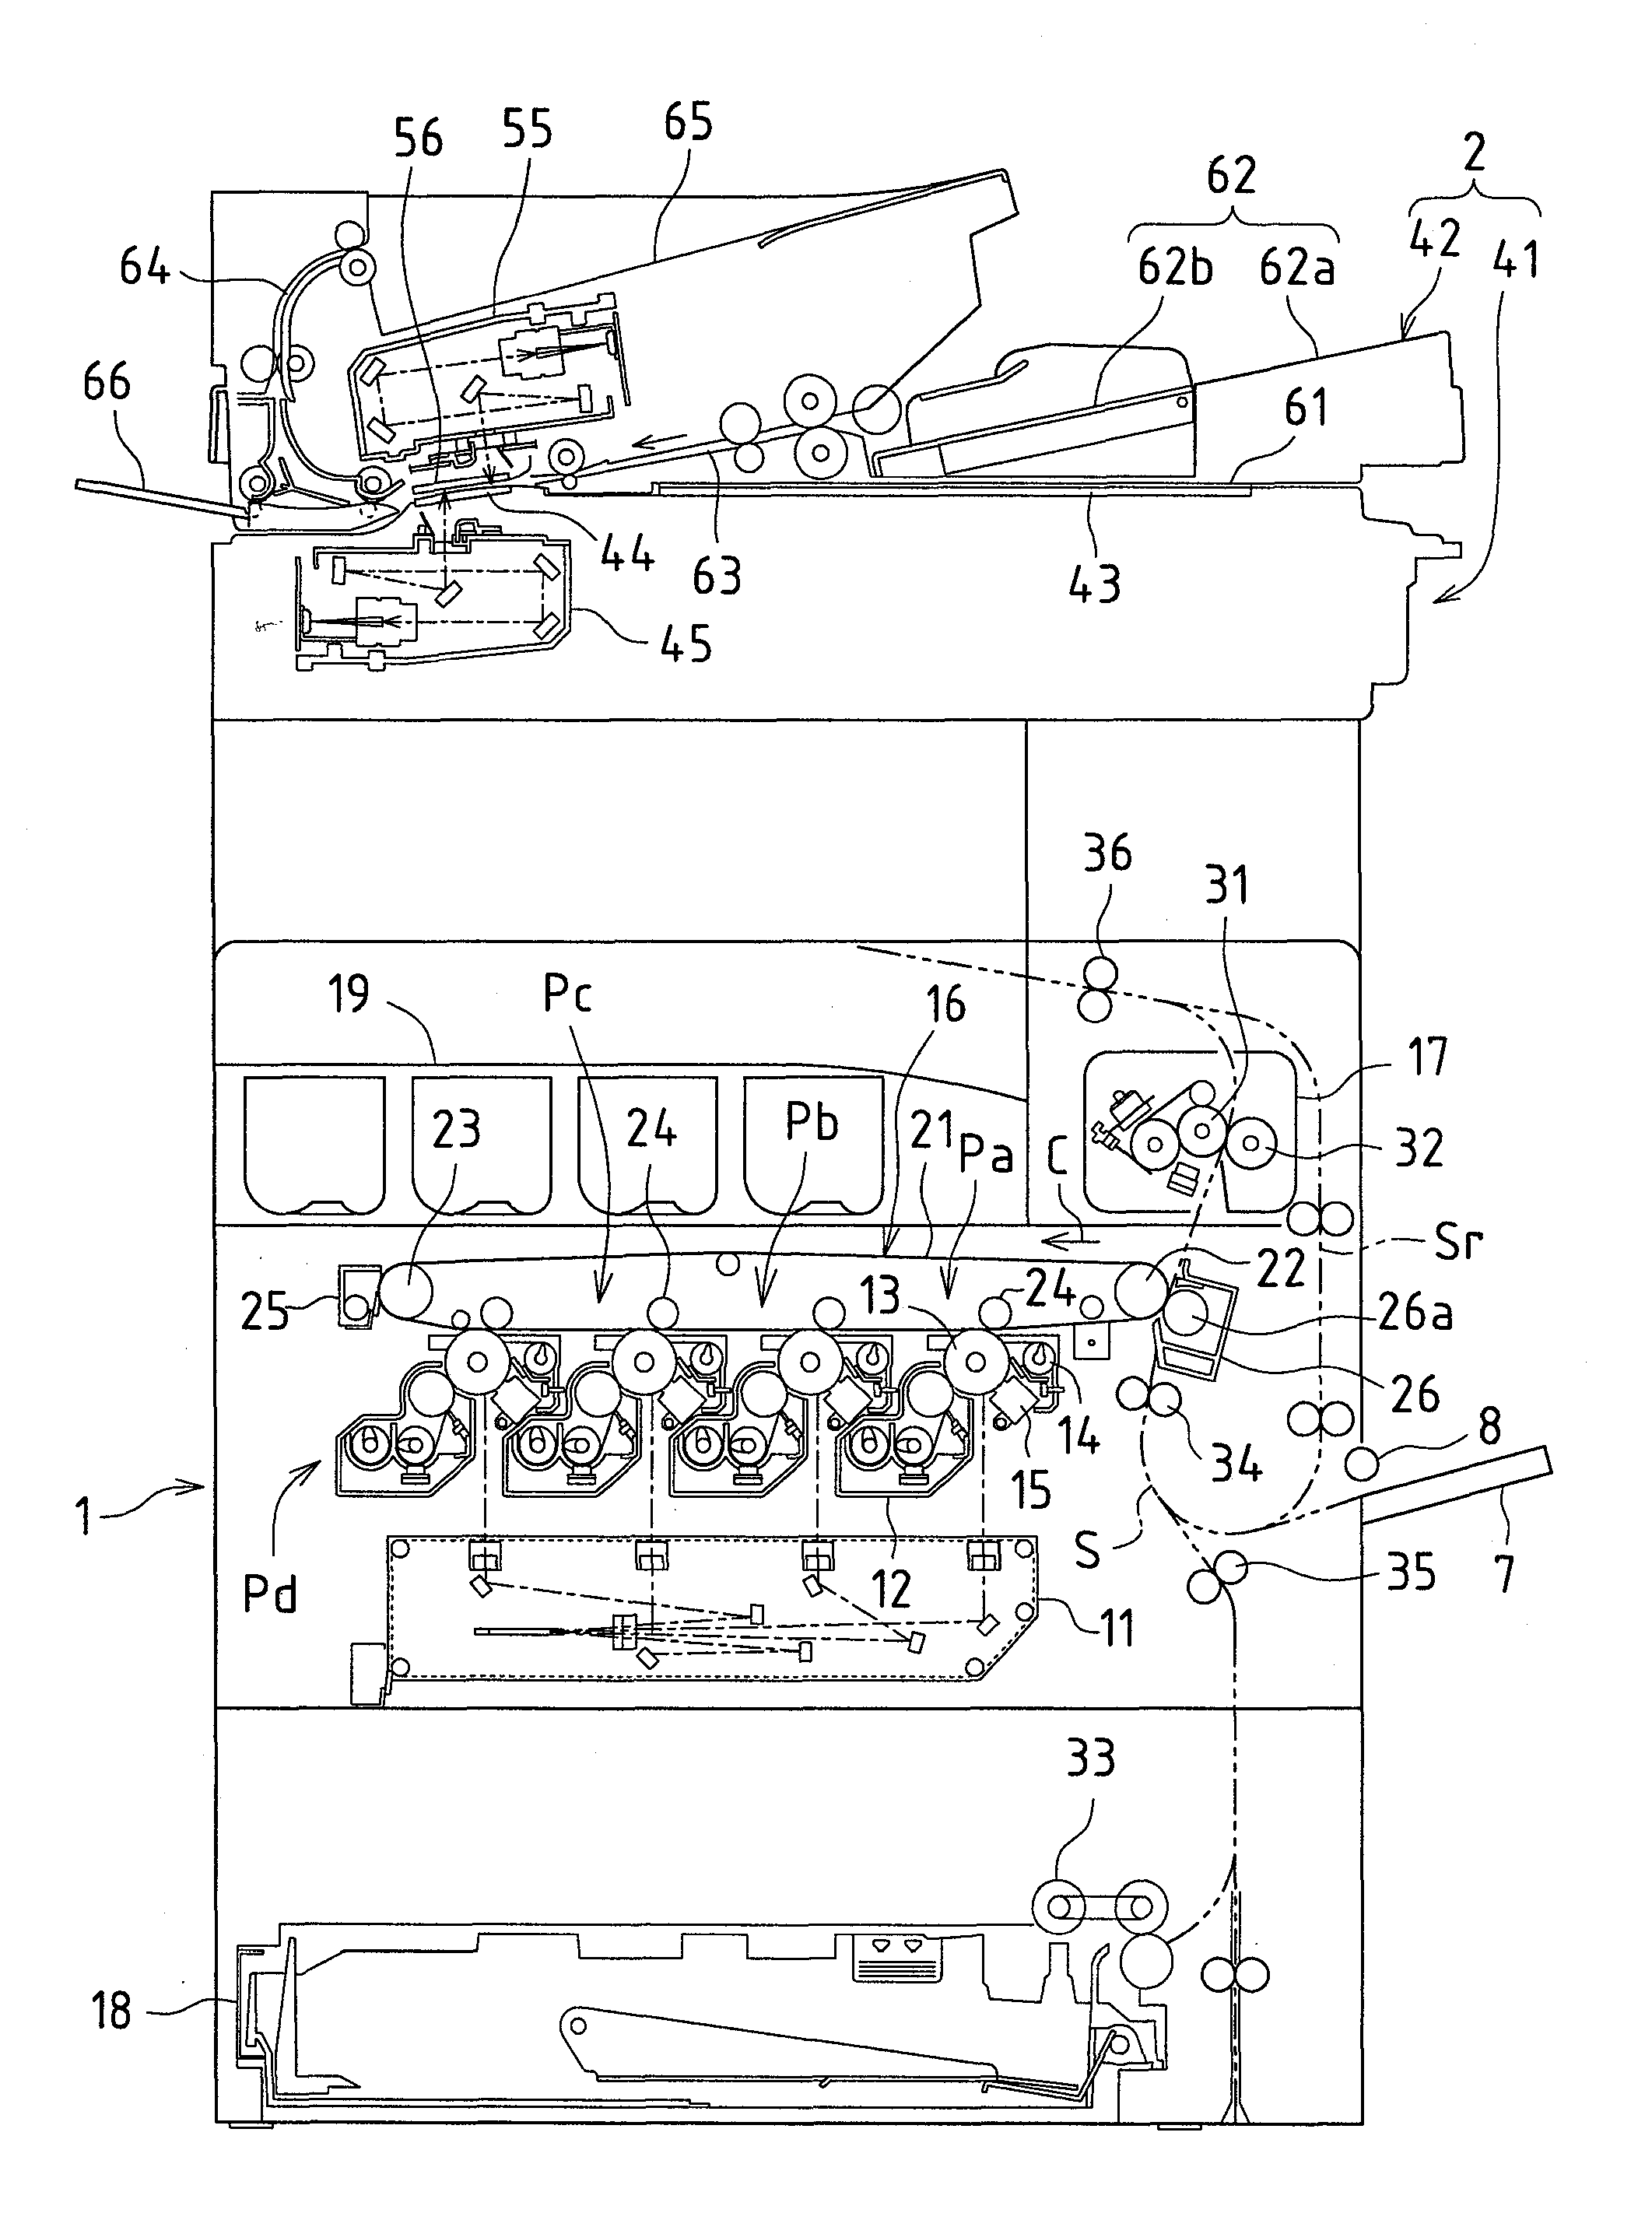 Image reading apparatus and image forming apparatus including the same